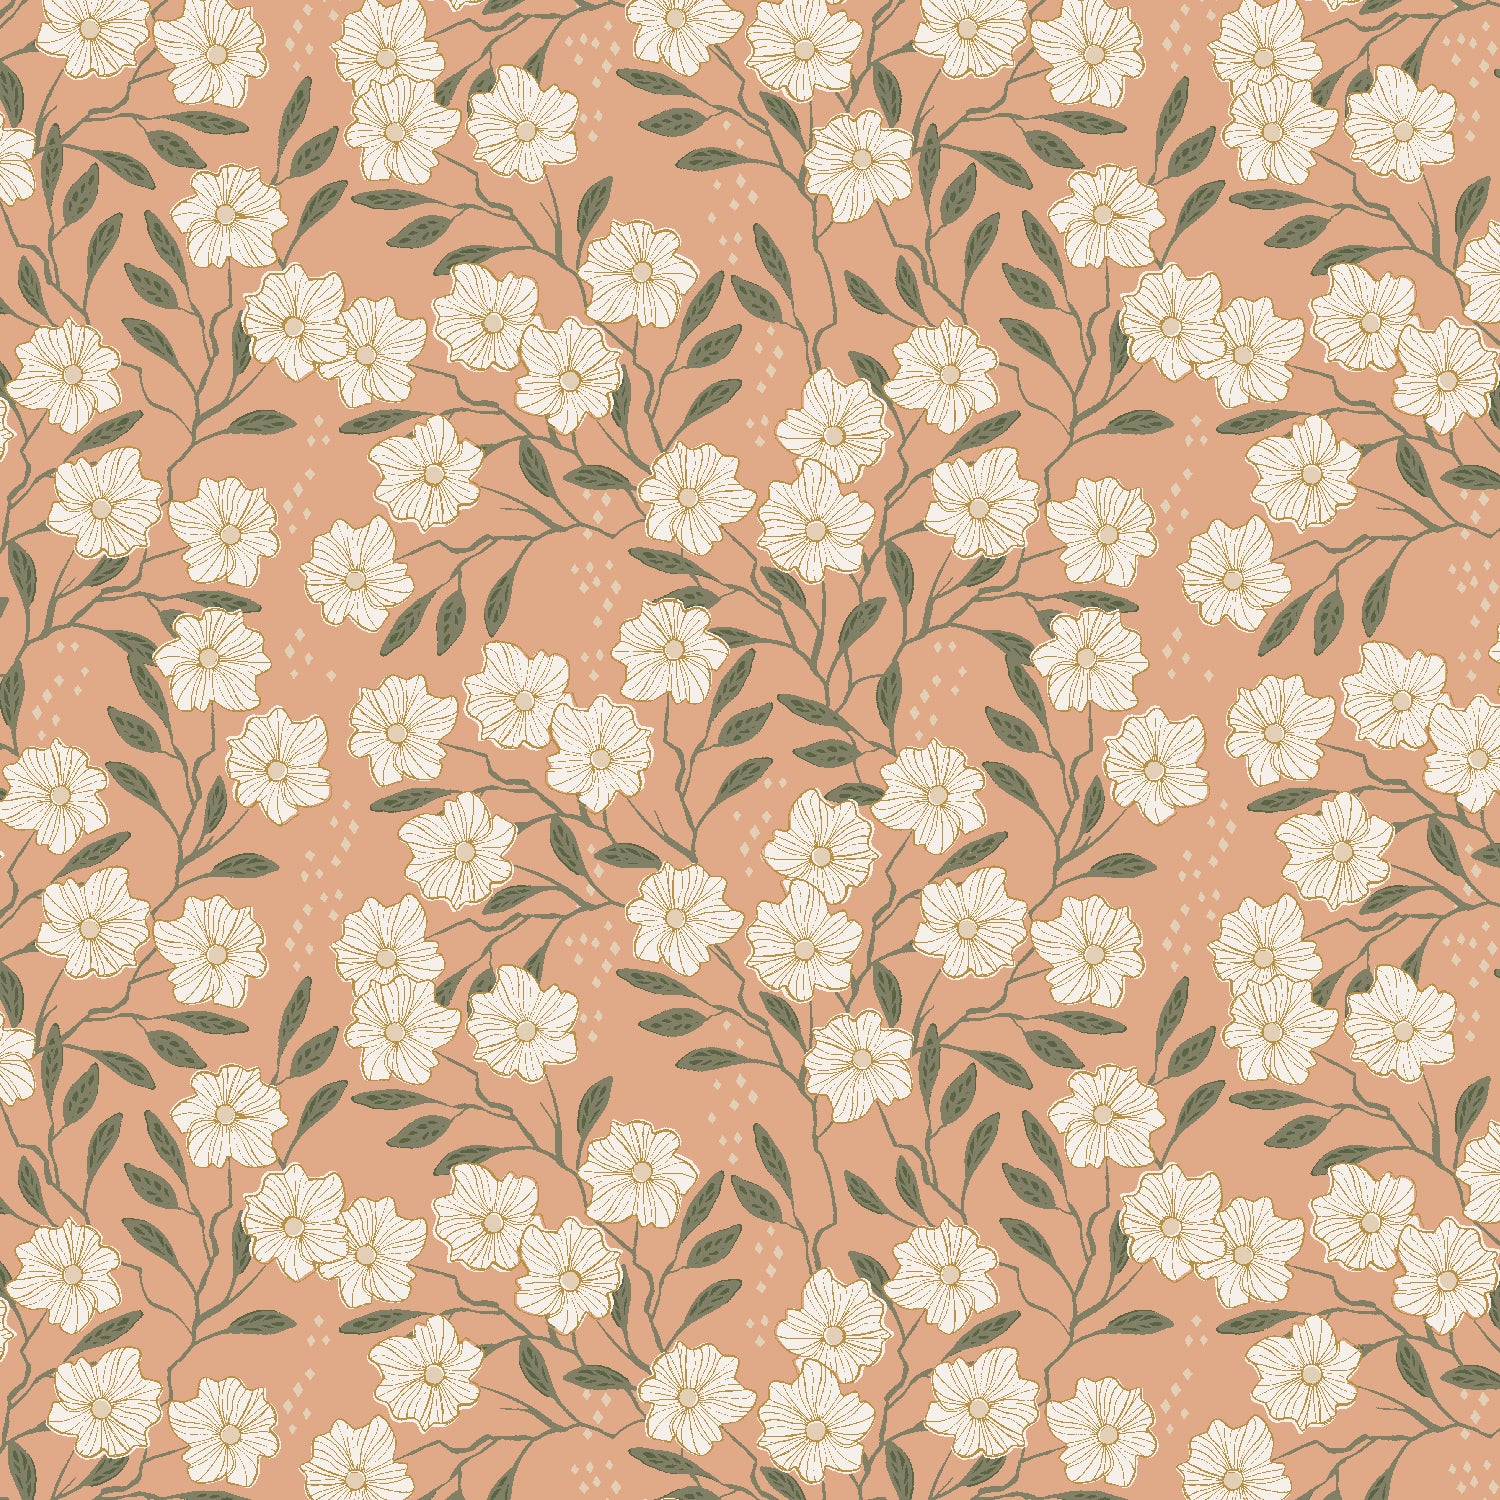 Get Out and Explore Quilt Fabric - Wild Vines in Peach - MT101-PE2